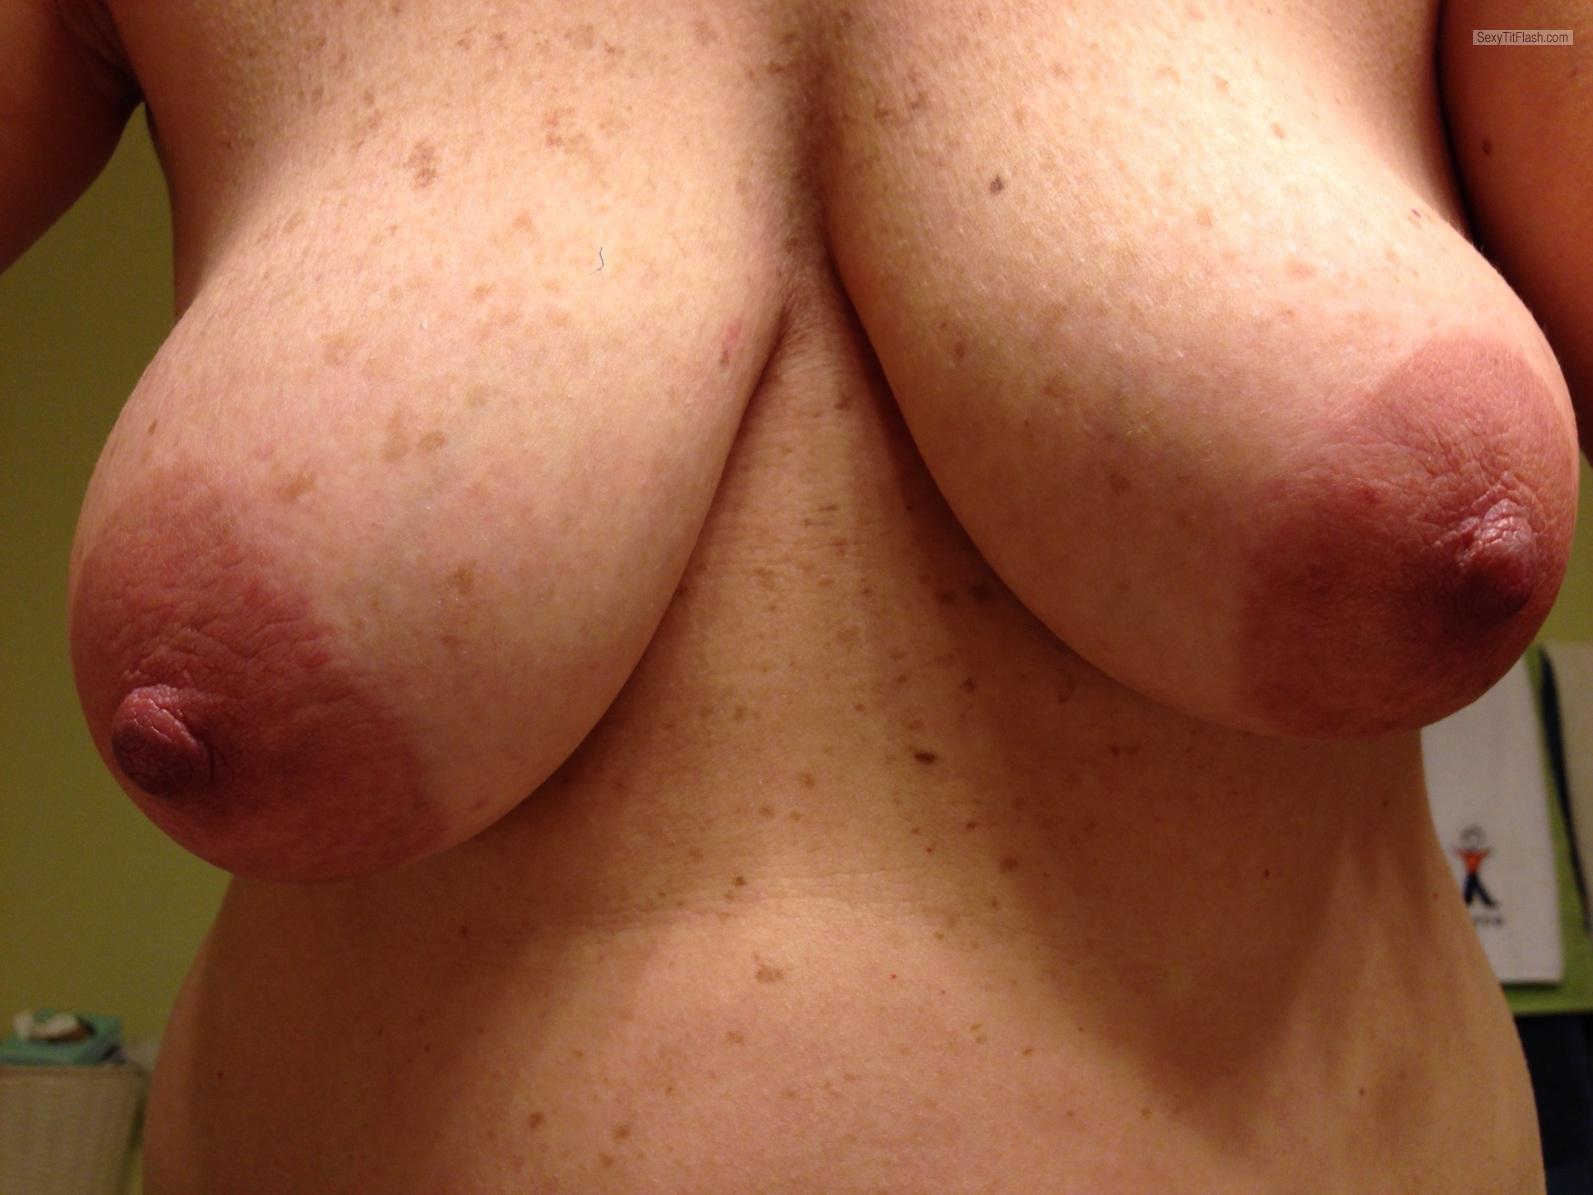 Tit Flash: My Very Big Tits (Selfie) - Areola Hangers from Australia